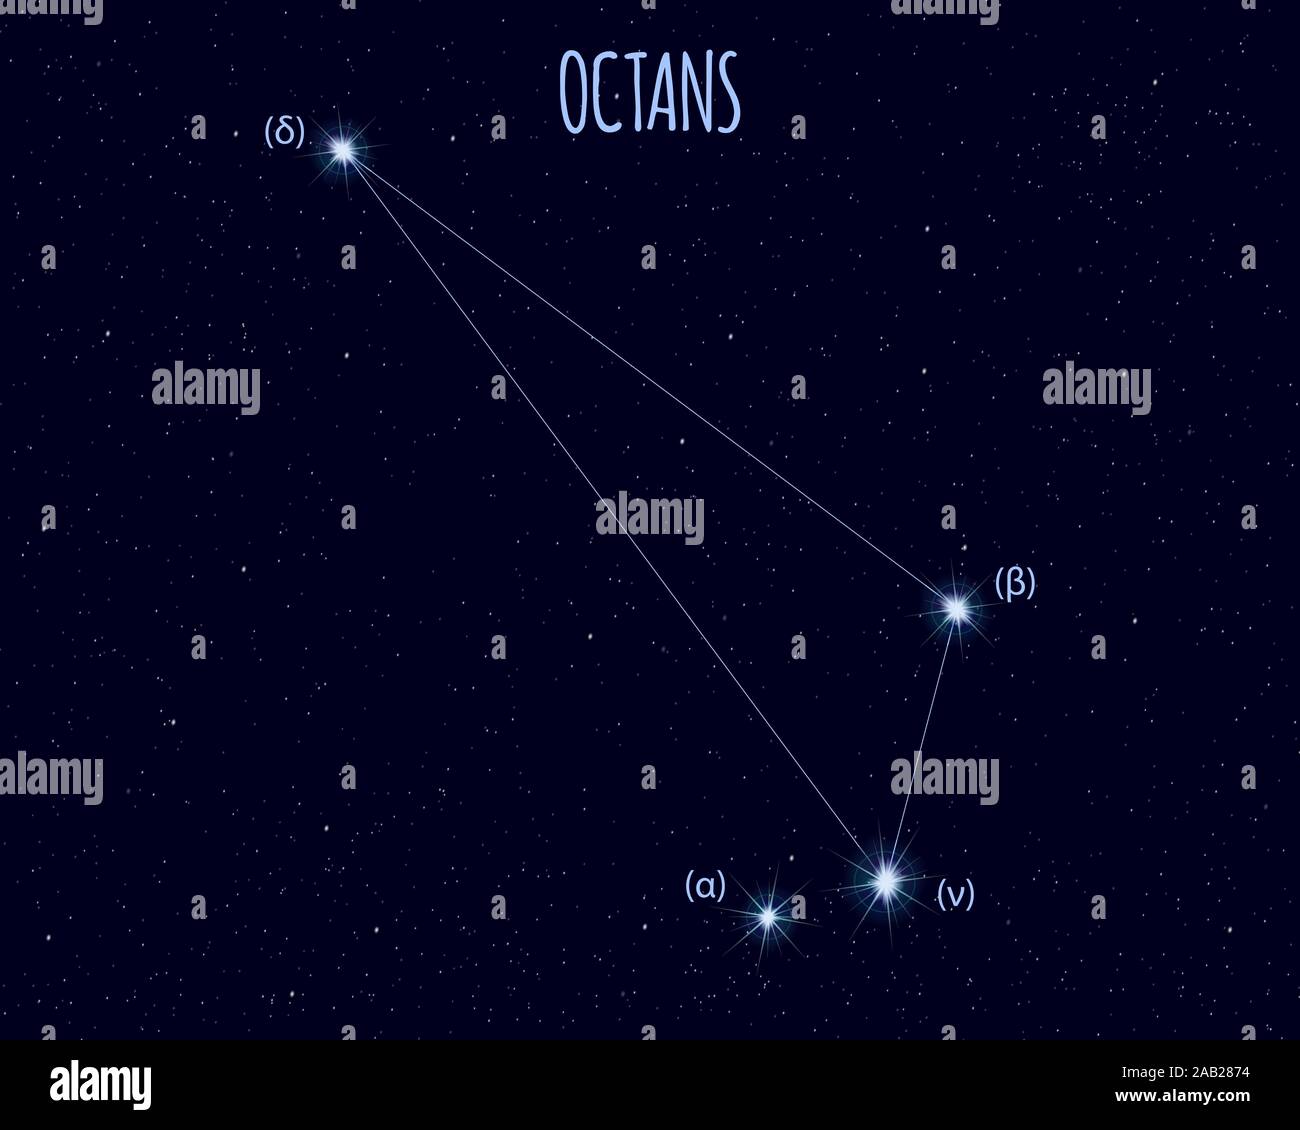 Octans (The Octant) constellation, vector illustration with basic stars against the starry sky Stock Vector